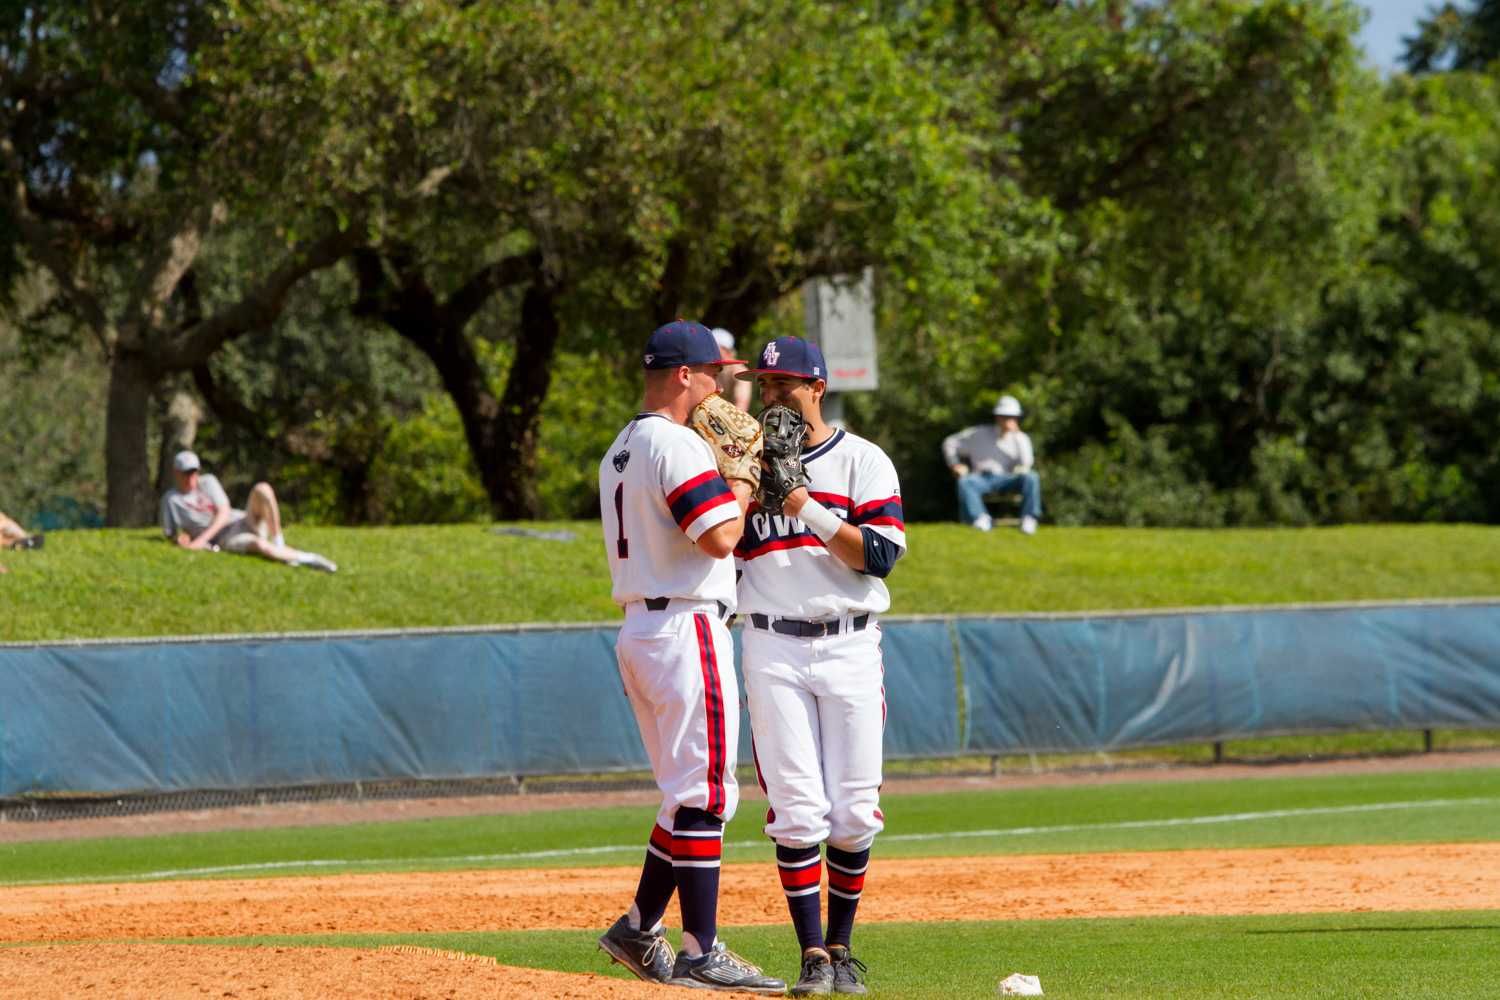 Senior pitcher Bo Logan (1) talks with a teammate in the top of the ninth inning. Logan had the save in The Owls’ 2-1 win against The Buckeyes.